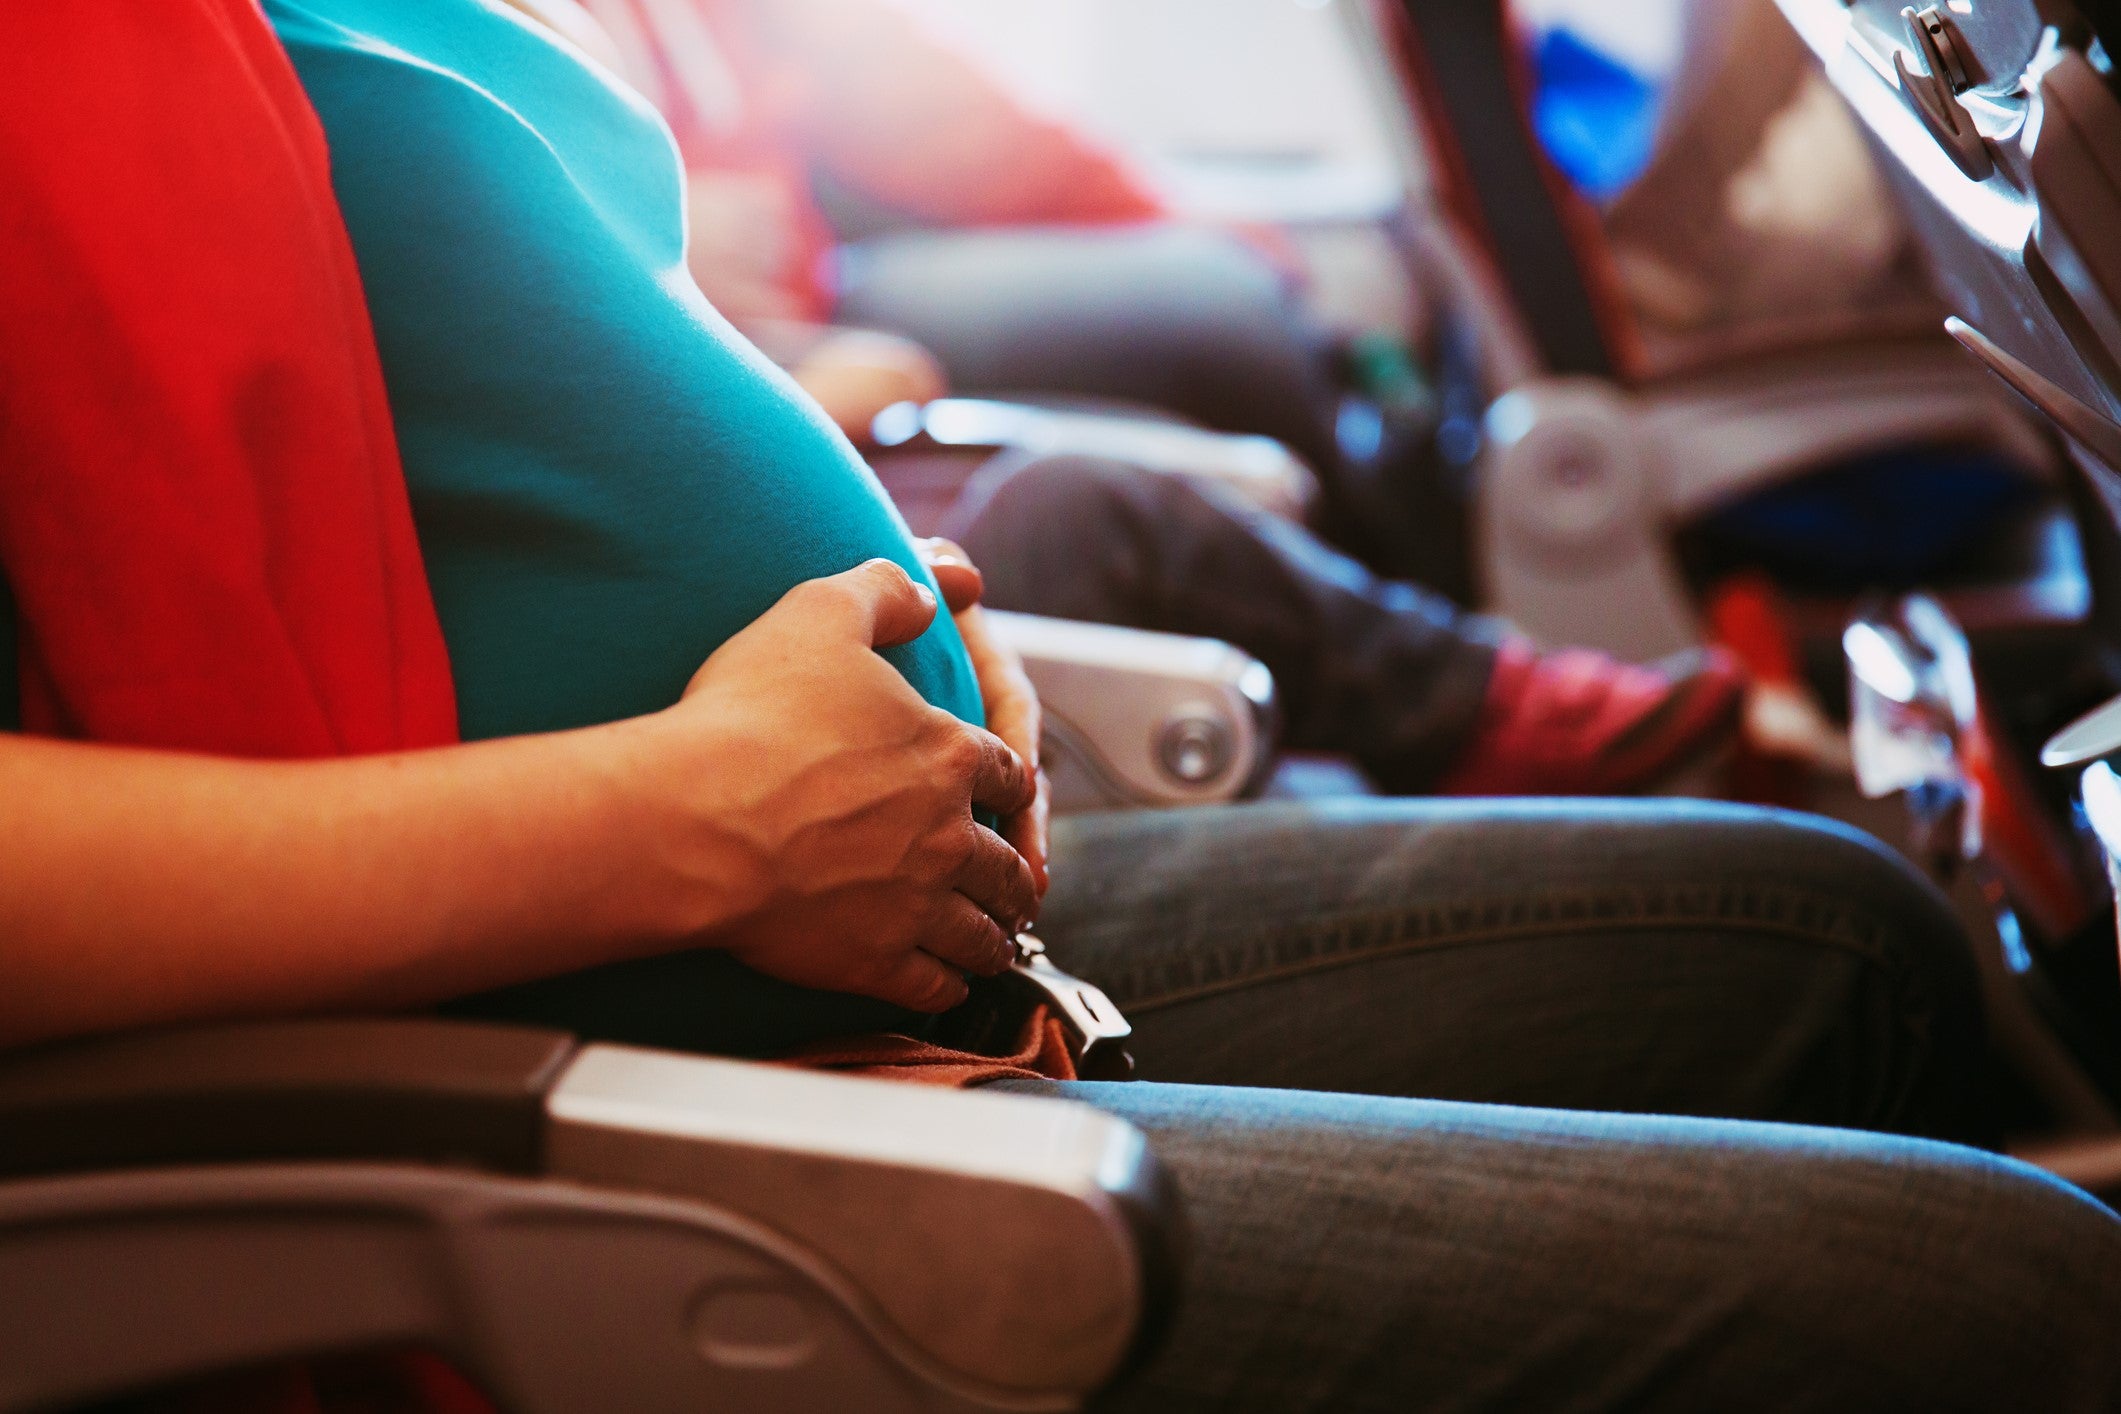 Everything you need to know about flying when pregnant